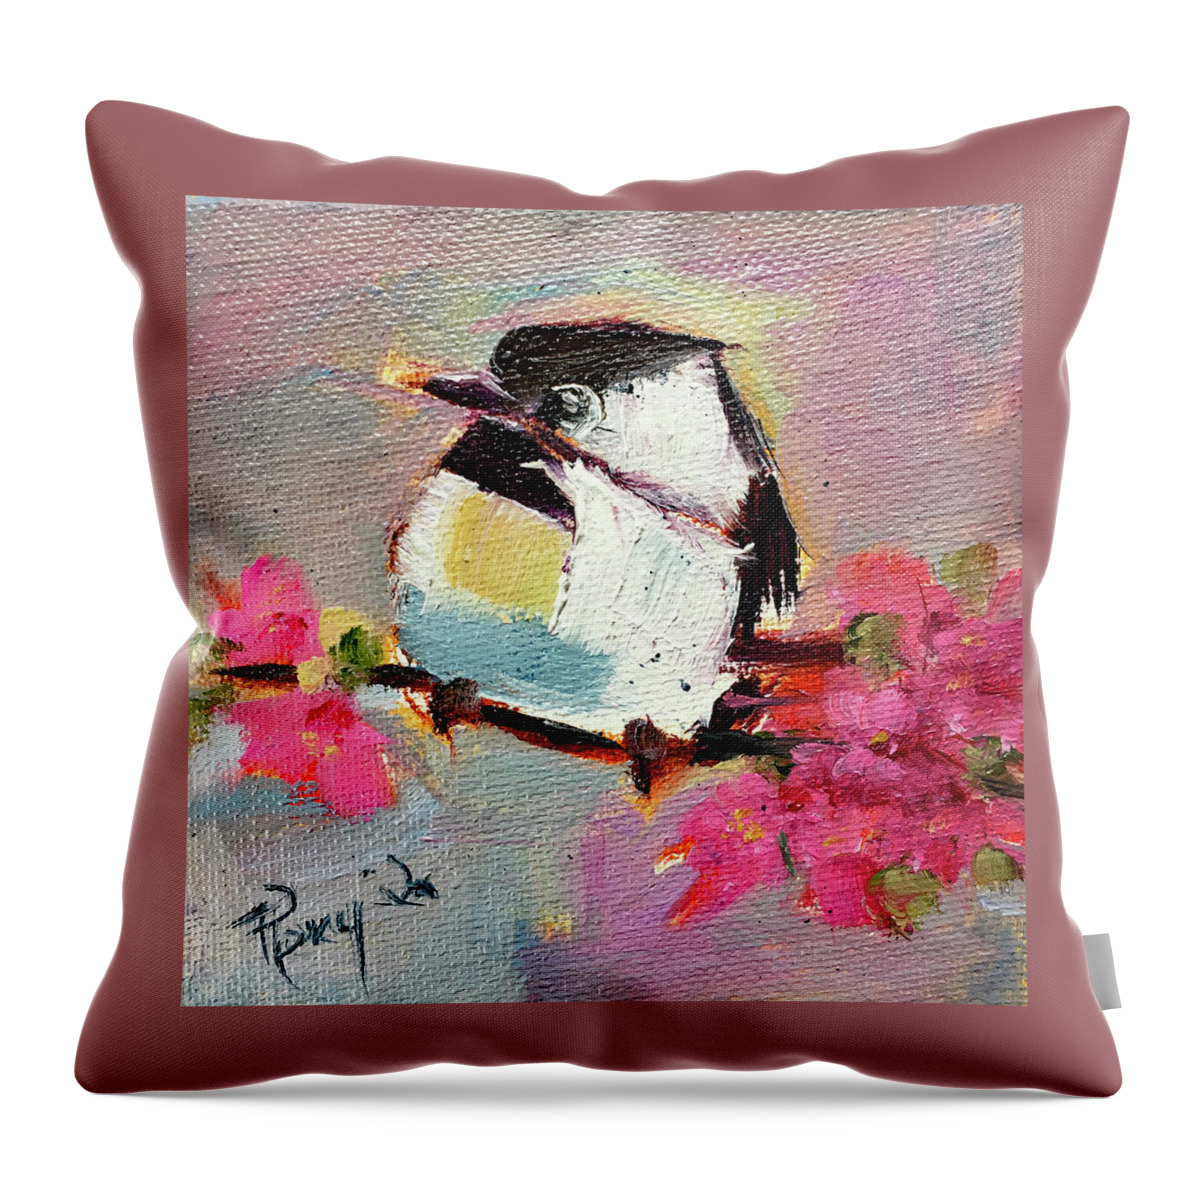 Chickadee Throw Pillow featuring the painting Chickadee 5 by Roxy Rich